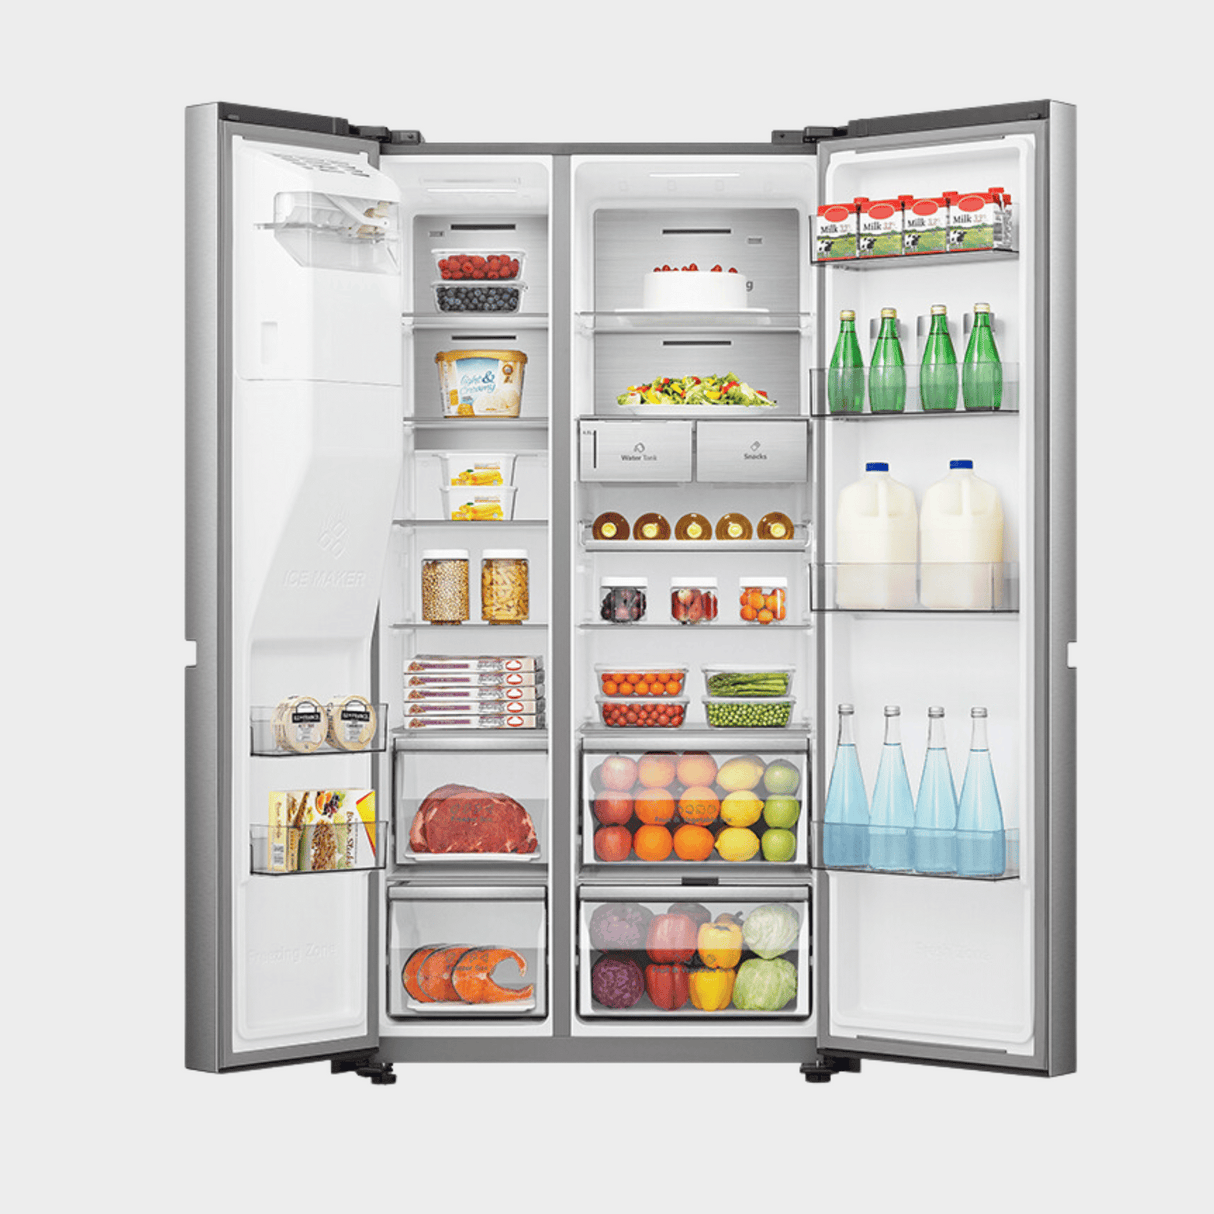 Hisense 720L 2-Door Side-by-Side Refrigerator with Water Dispenser and Ice Maker, WiFi Connectivity, RC-72WS4SA